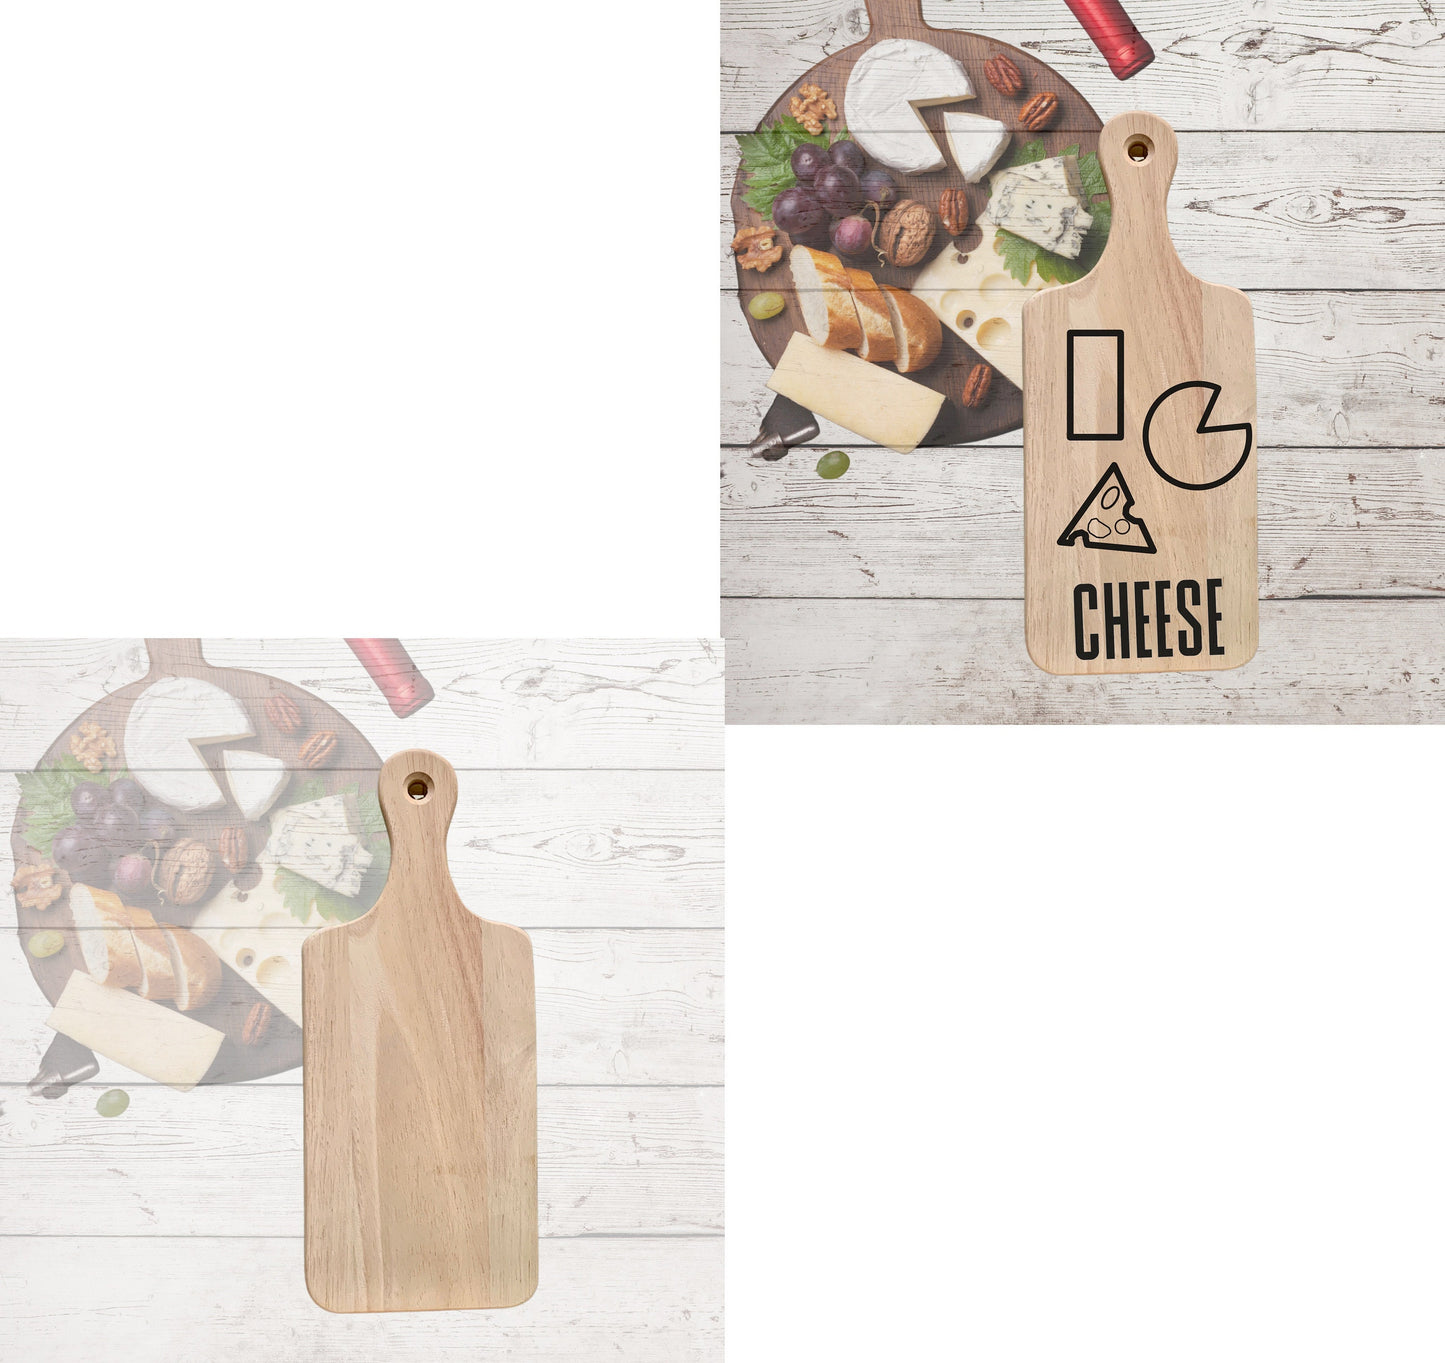 Wood Cutting Board for Kitchen|Cutting Board Serving Tray